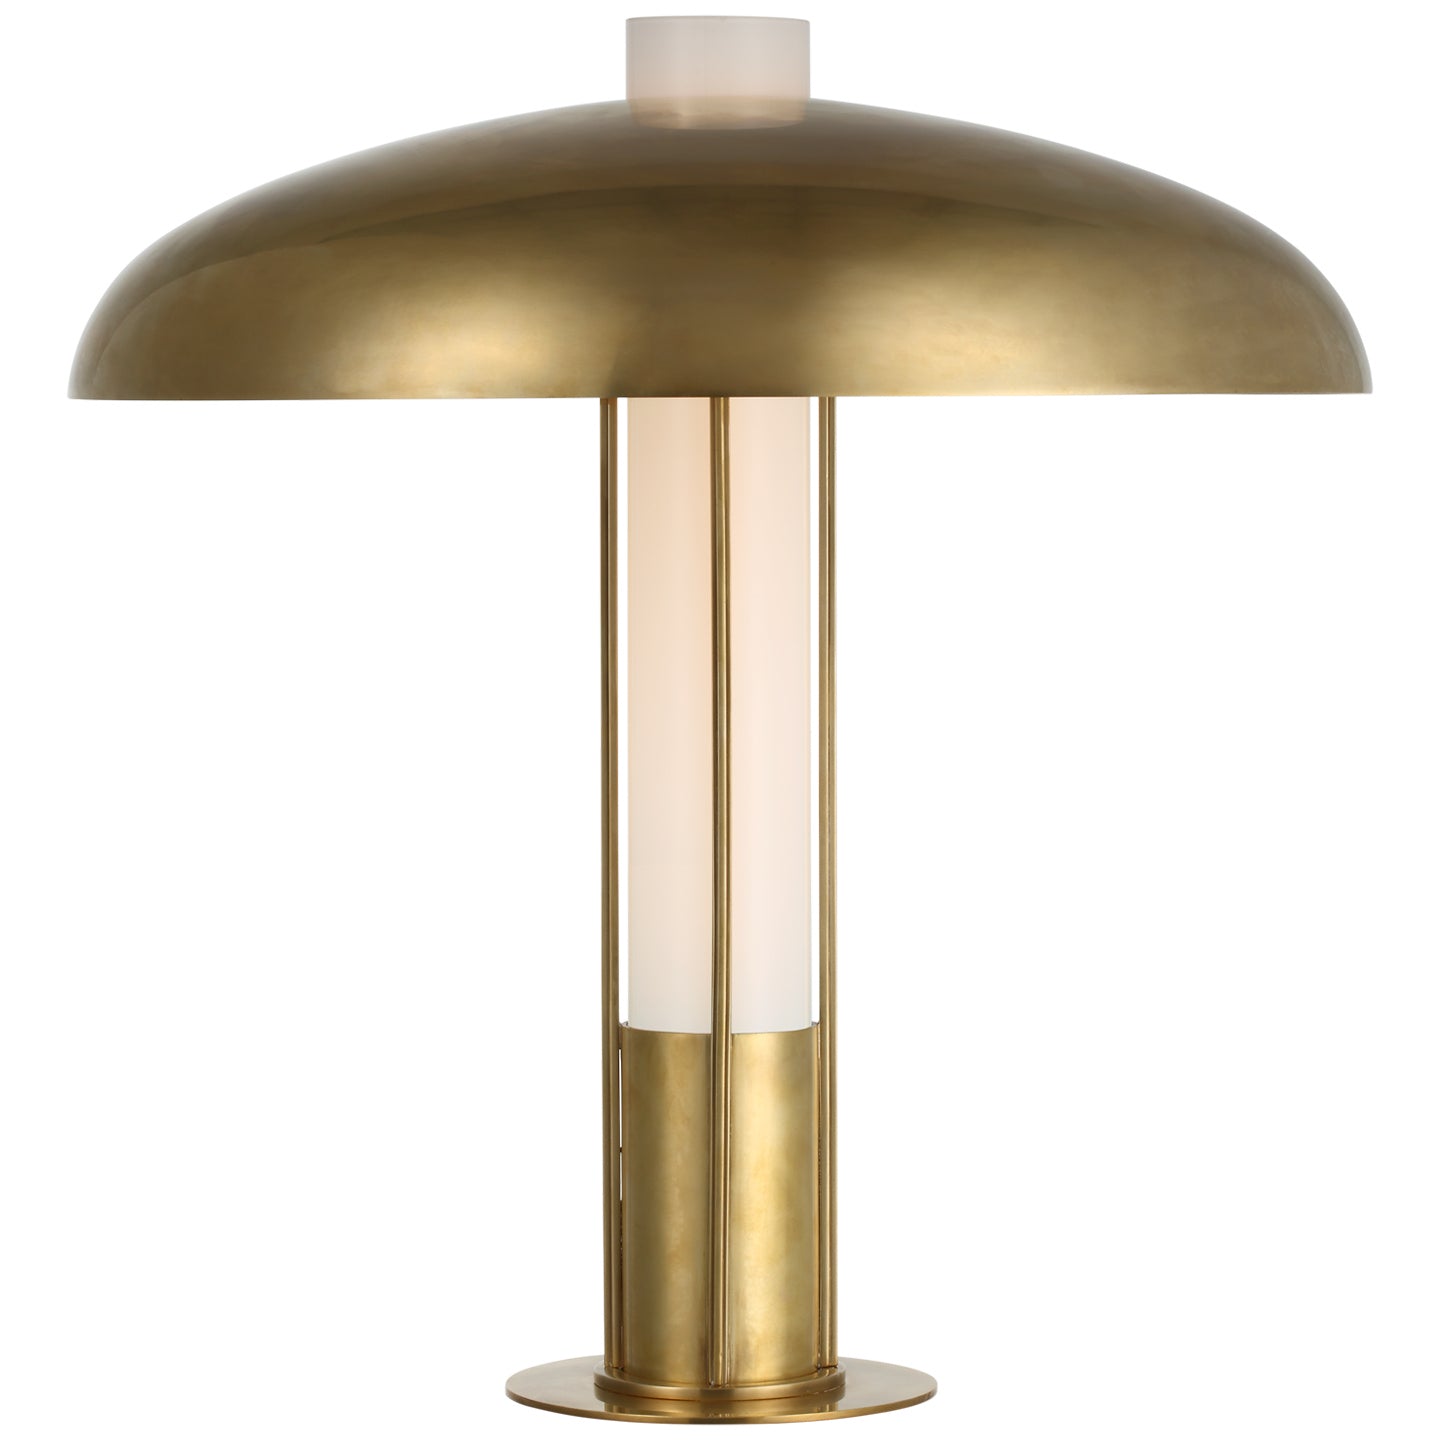 Load image into Gallery viewer, Visual Comfort Signature - KW 3420AB-AB - LED Table Lamp - Troye - Antique-Burnished Brass
